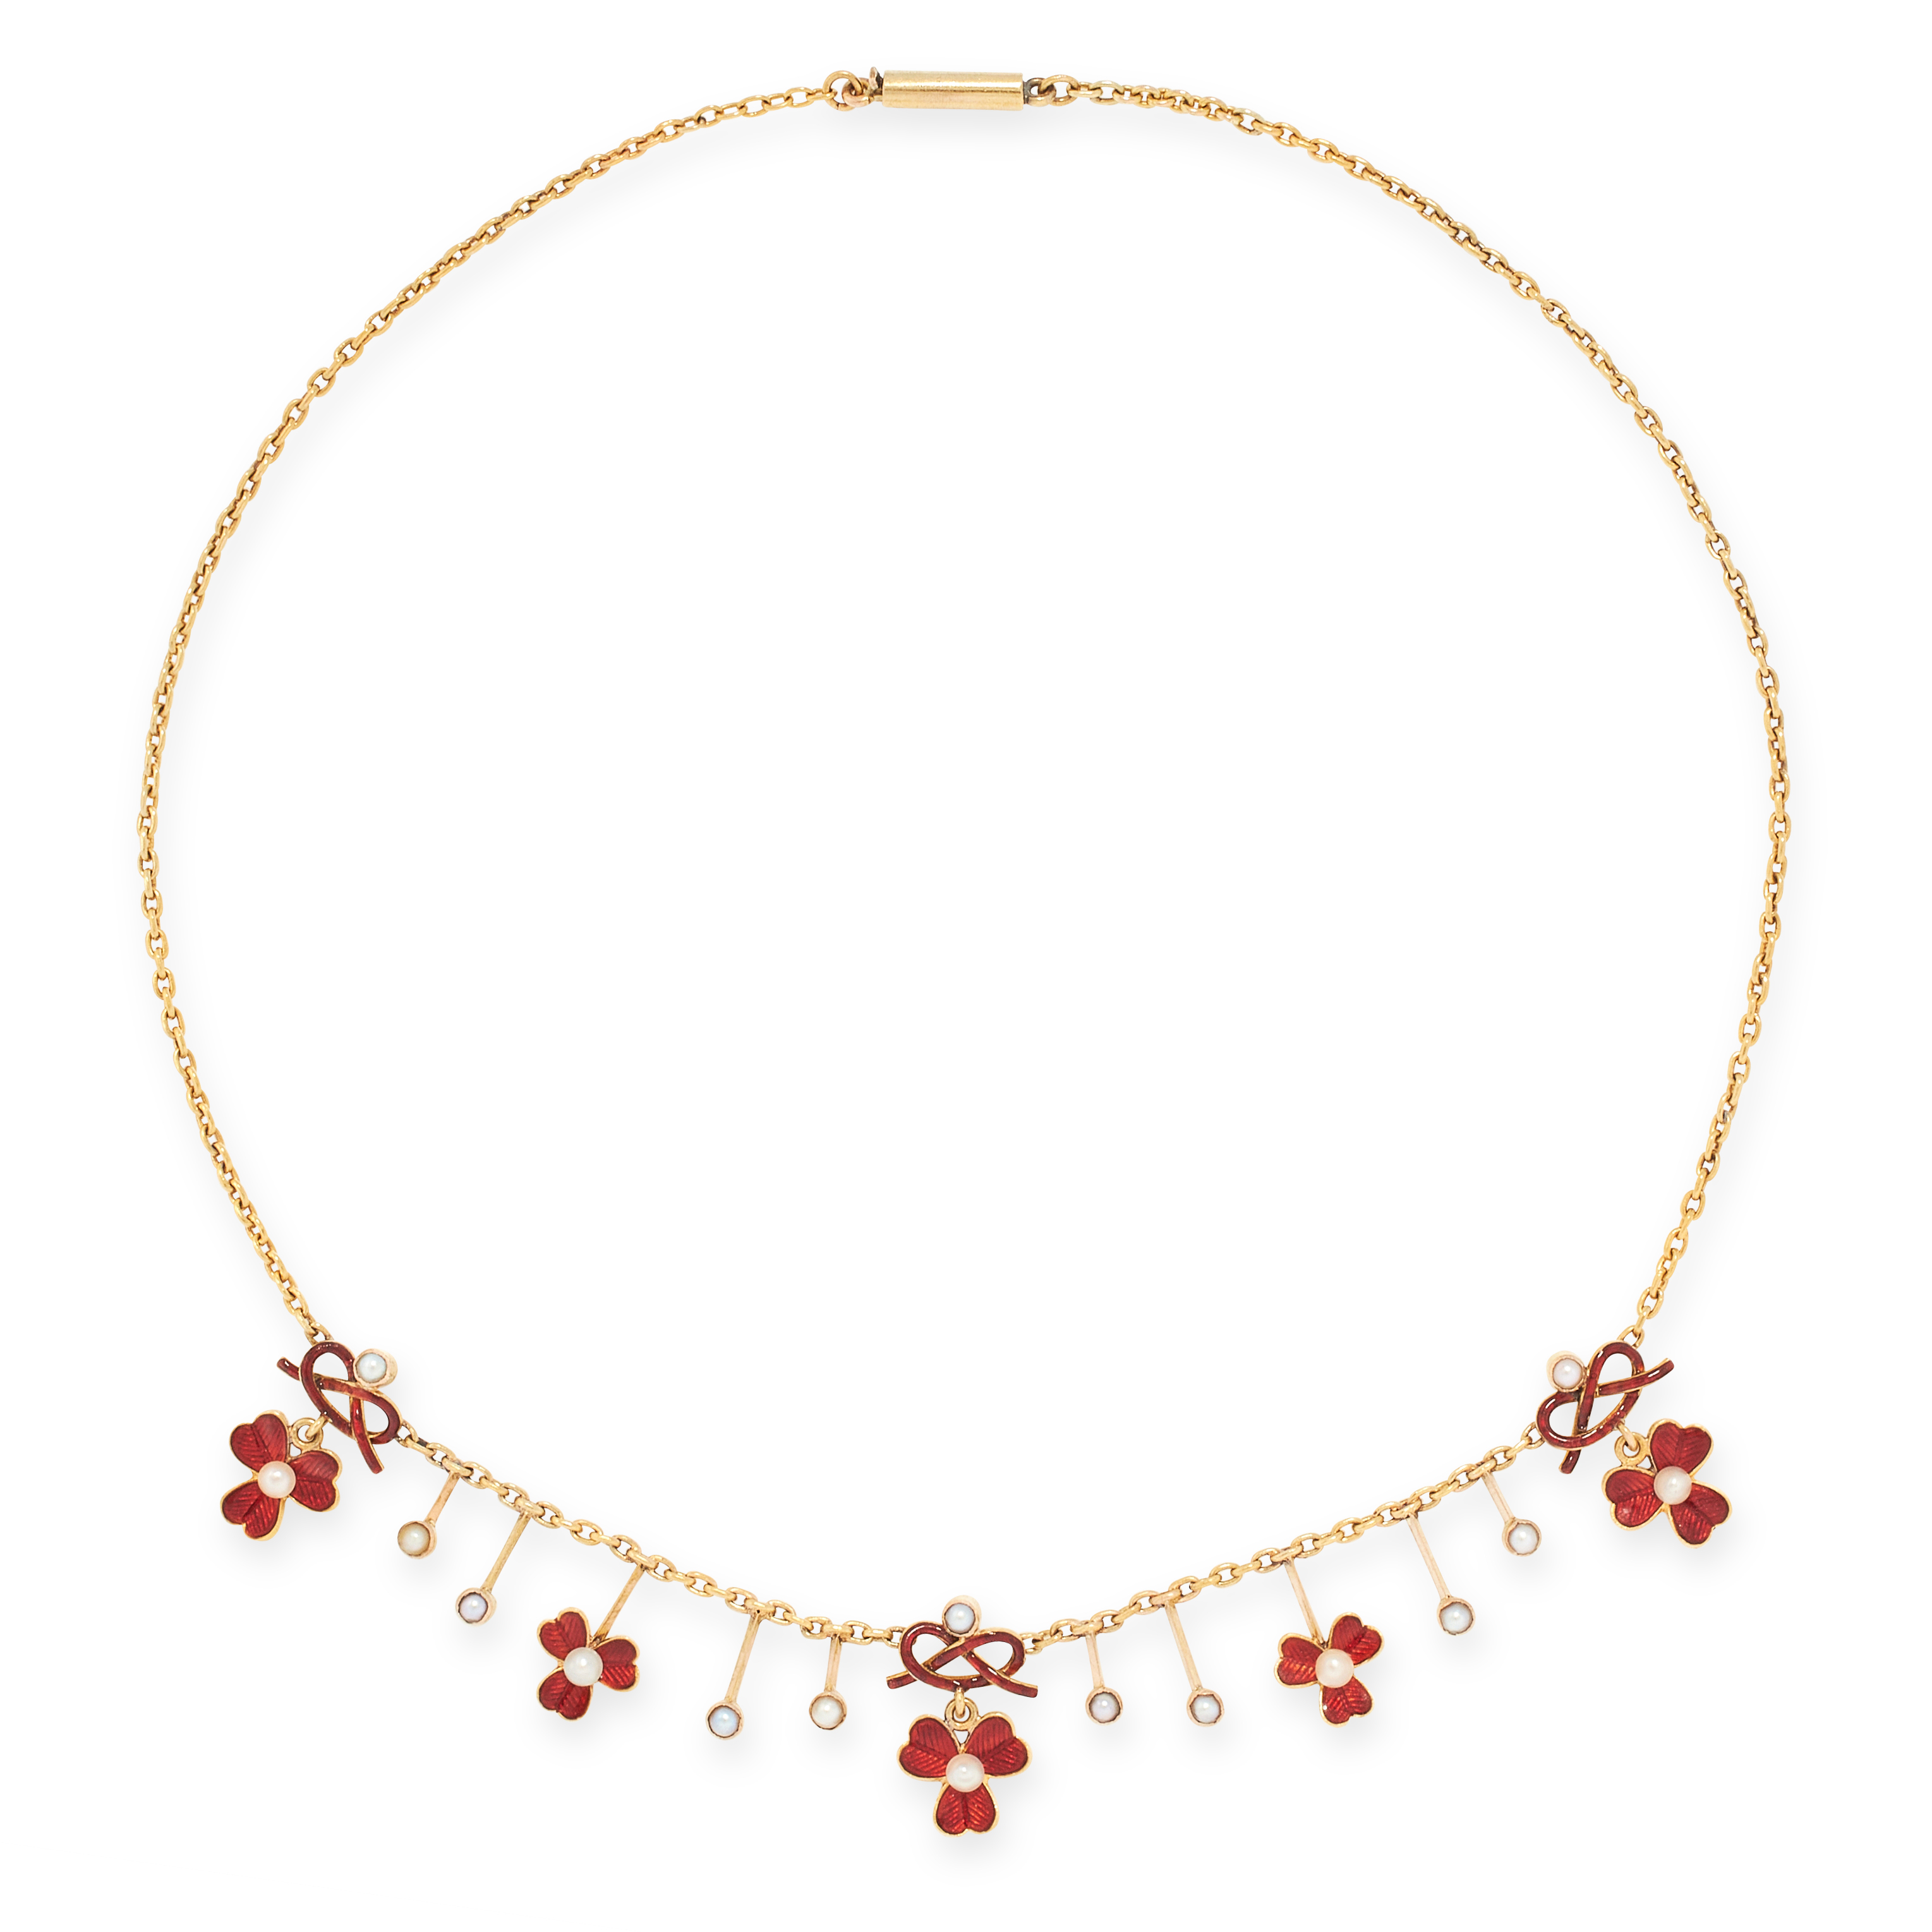 AN ANTIQUE PEARL AND ENAMEL NECKLACE, CIRCA 1900 in yellow gold, the belcher link chain punctuated a